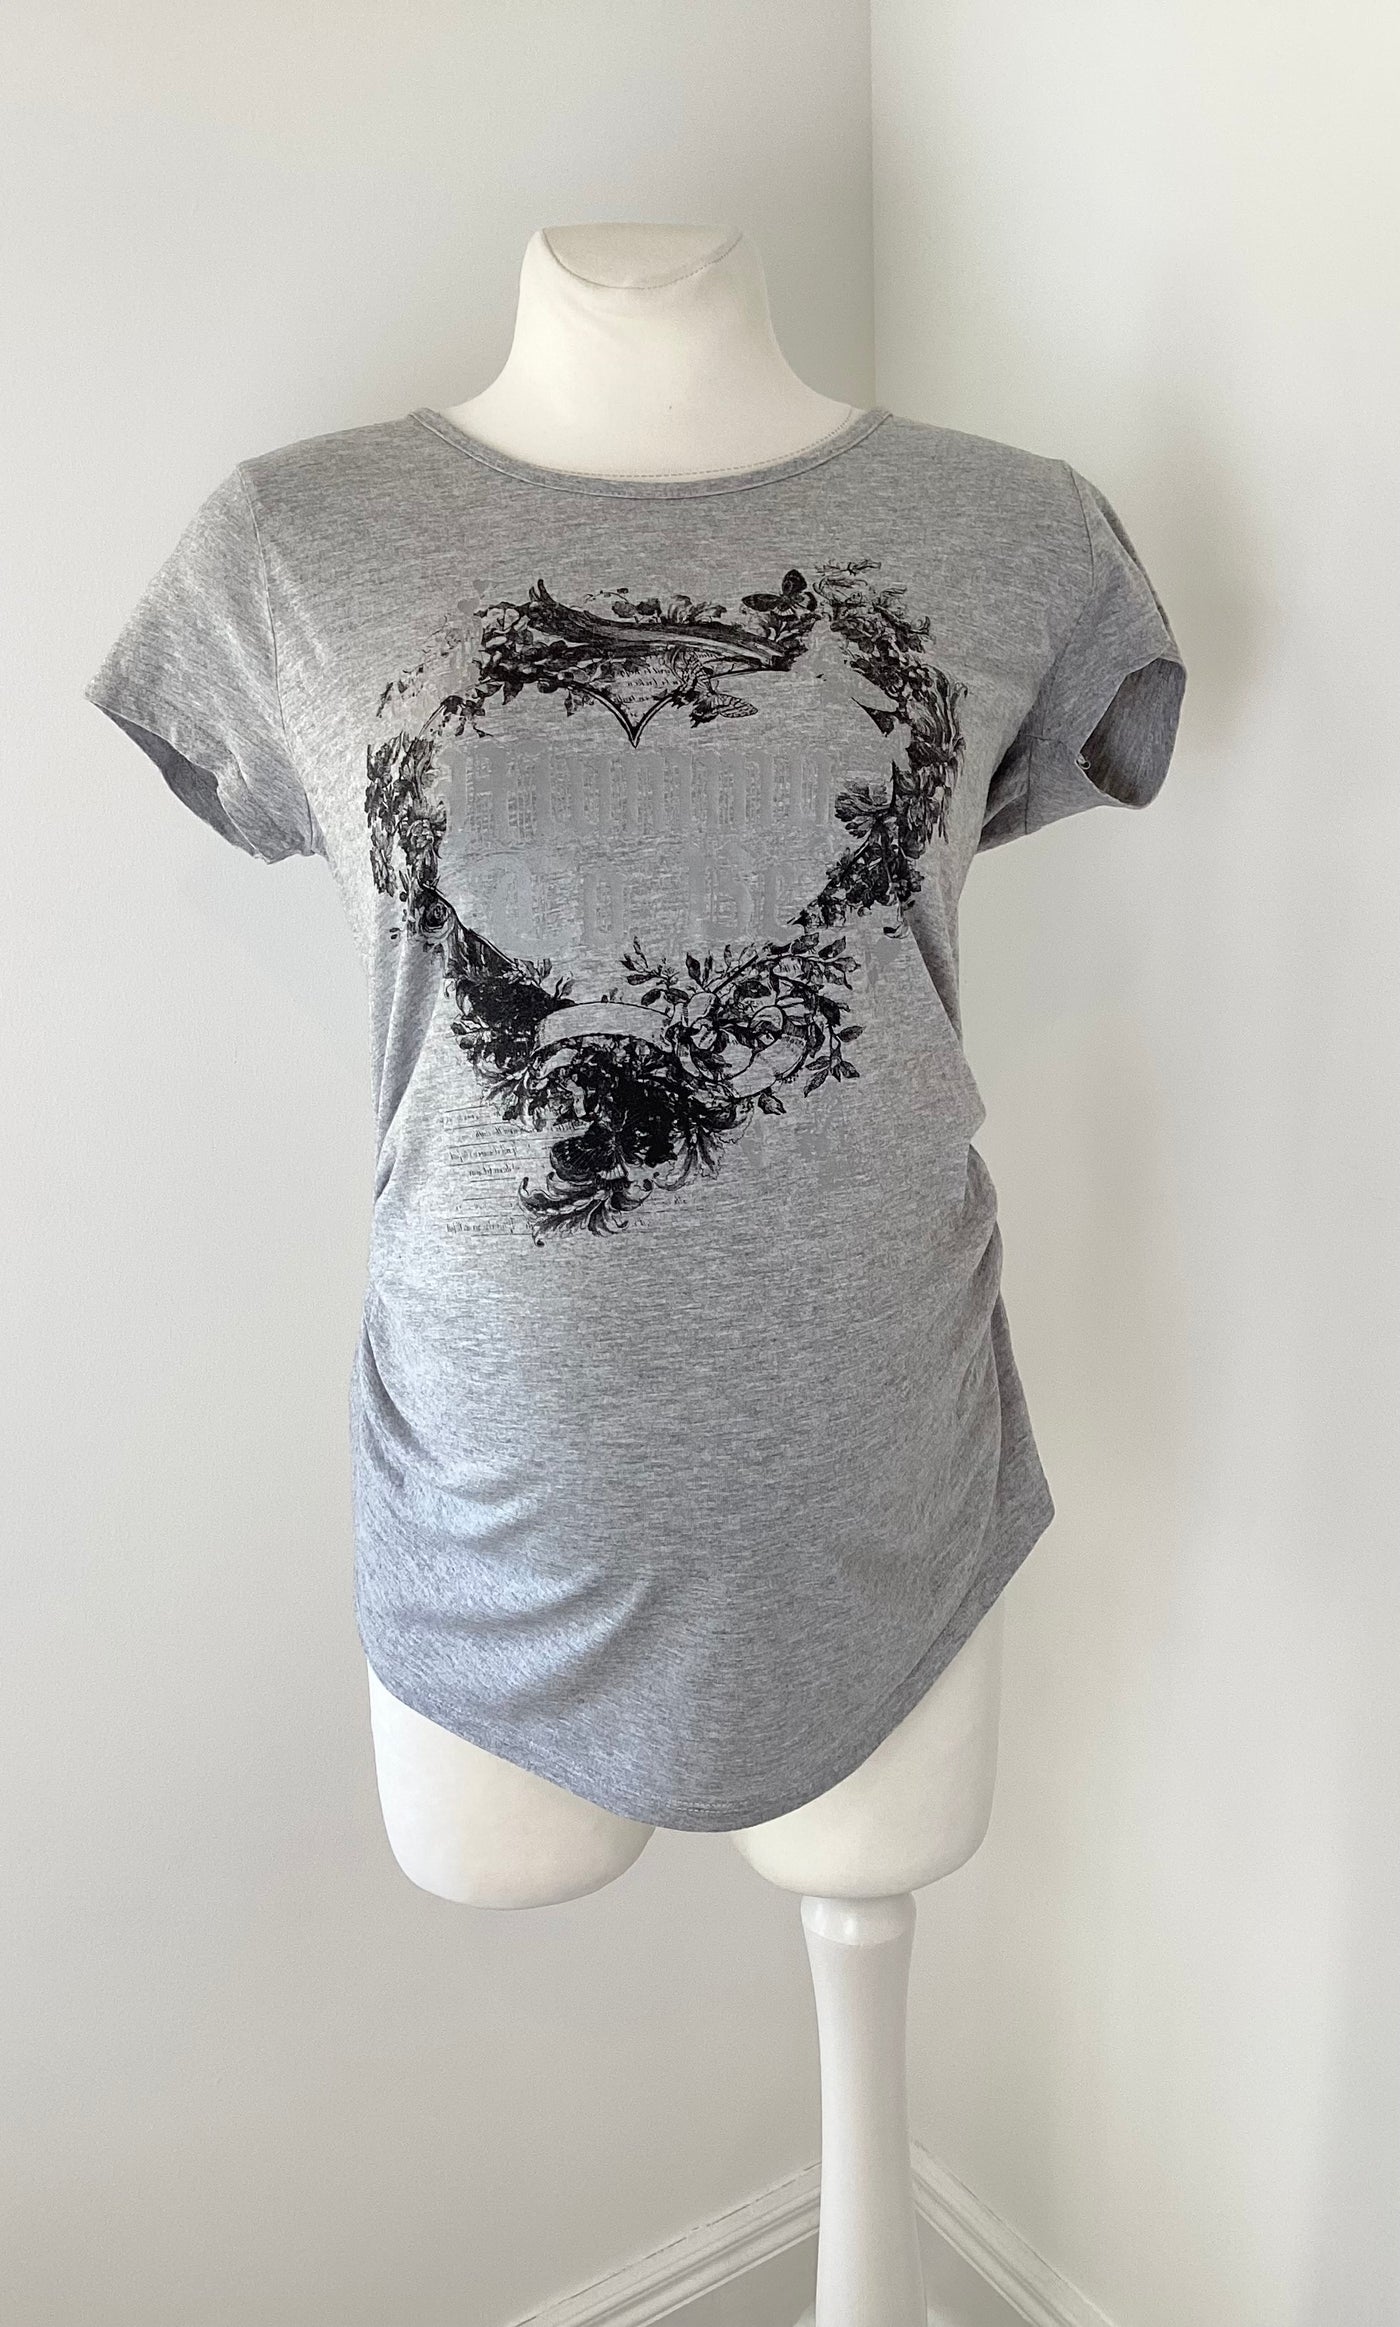 New Look Maternity grey & black 'Mummy To Be' logo t-shirt - Size 14 (more like 12/14)